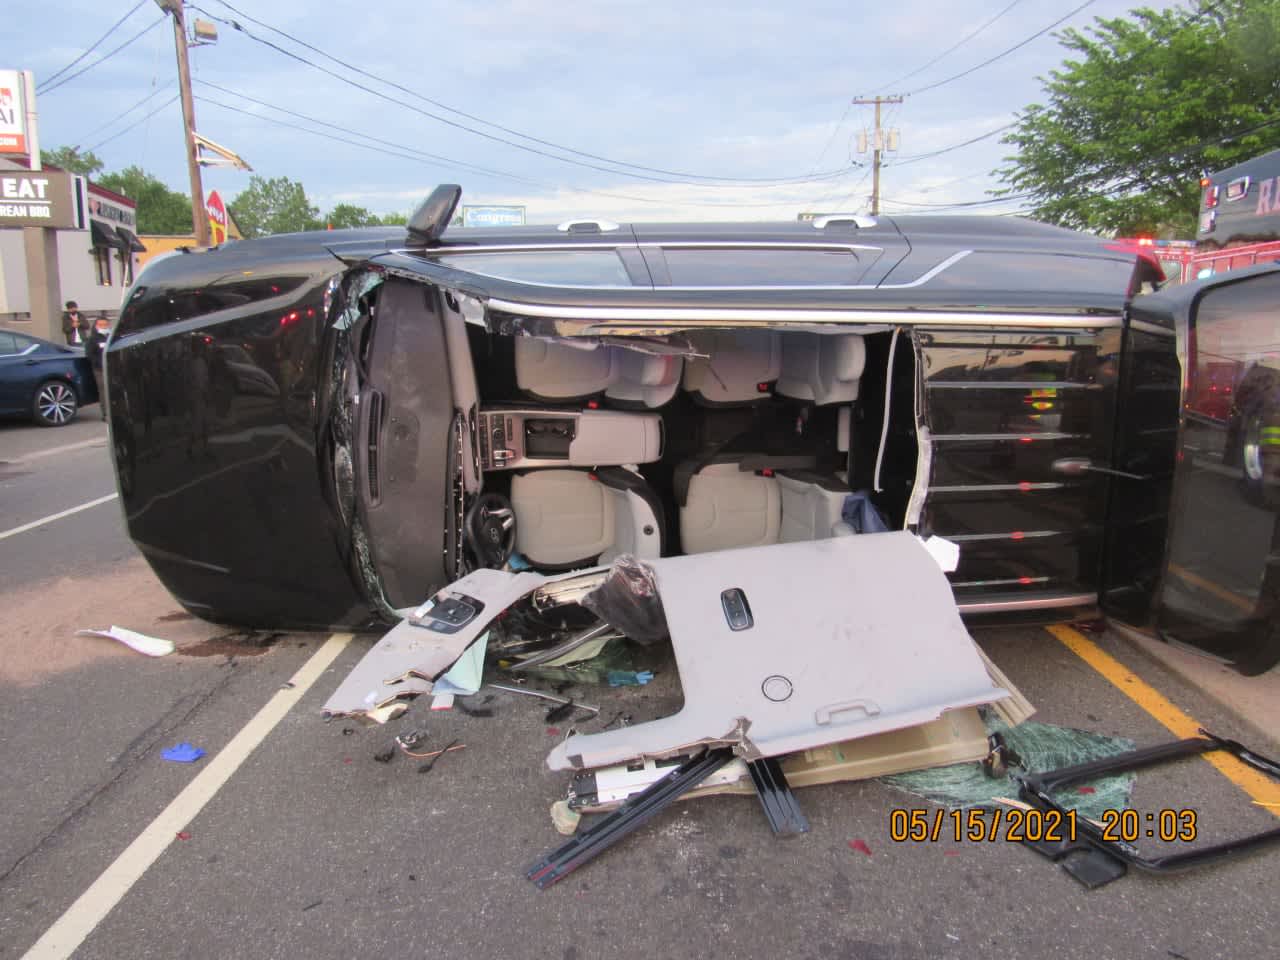 Route 46 crash in South Hackensack.